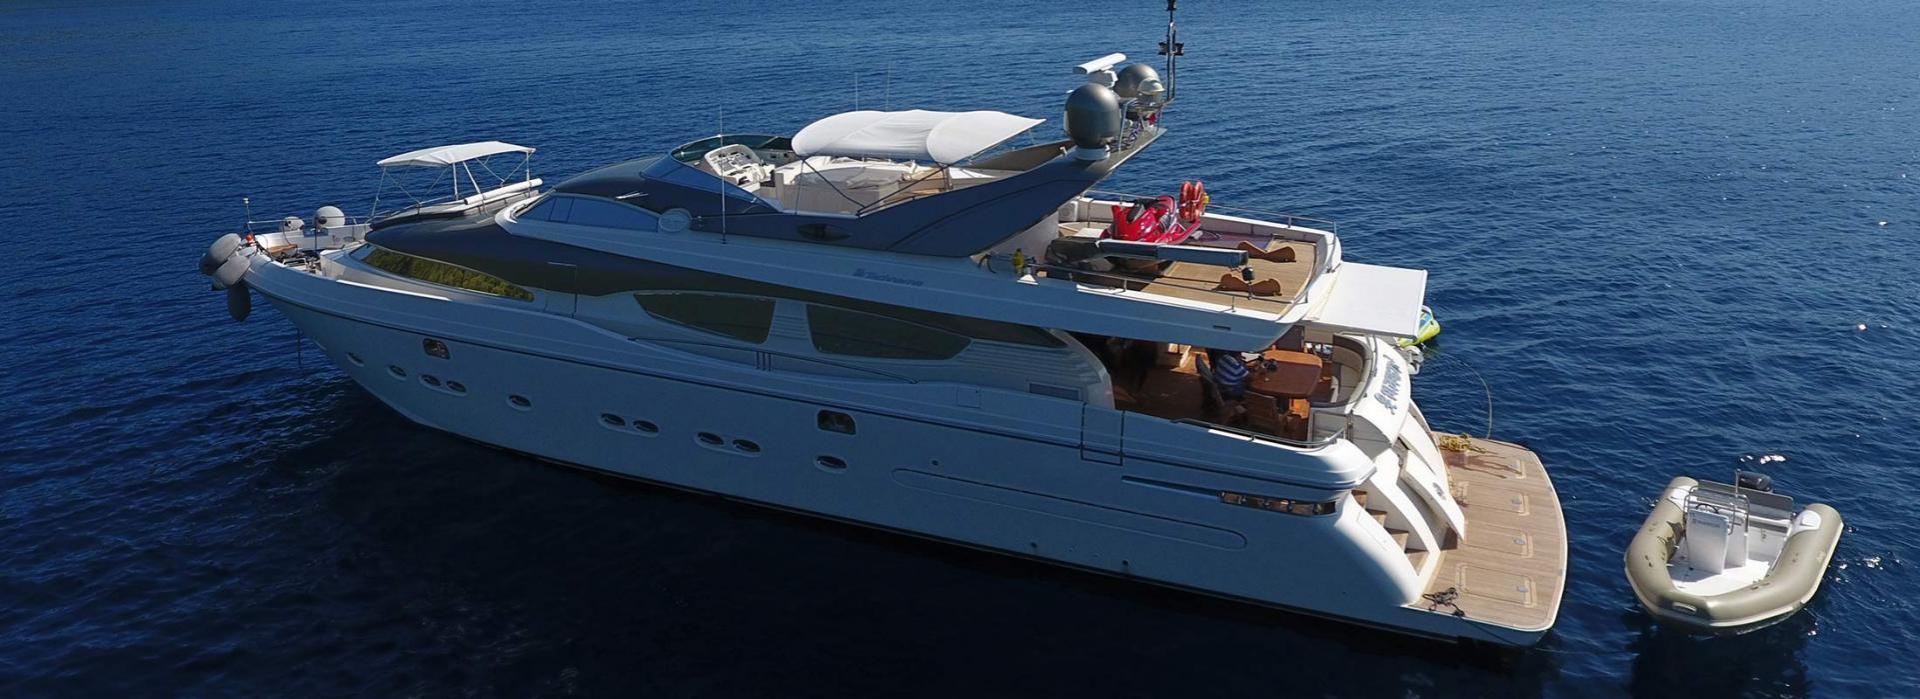 Athens Gold Yachting - Albator 2 / overview